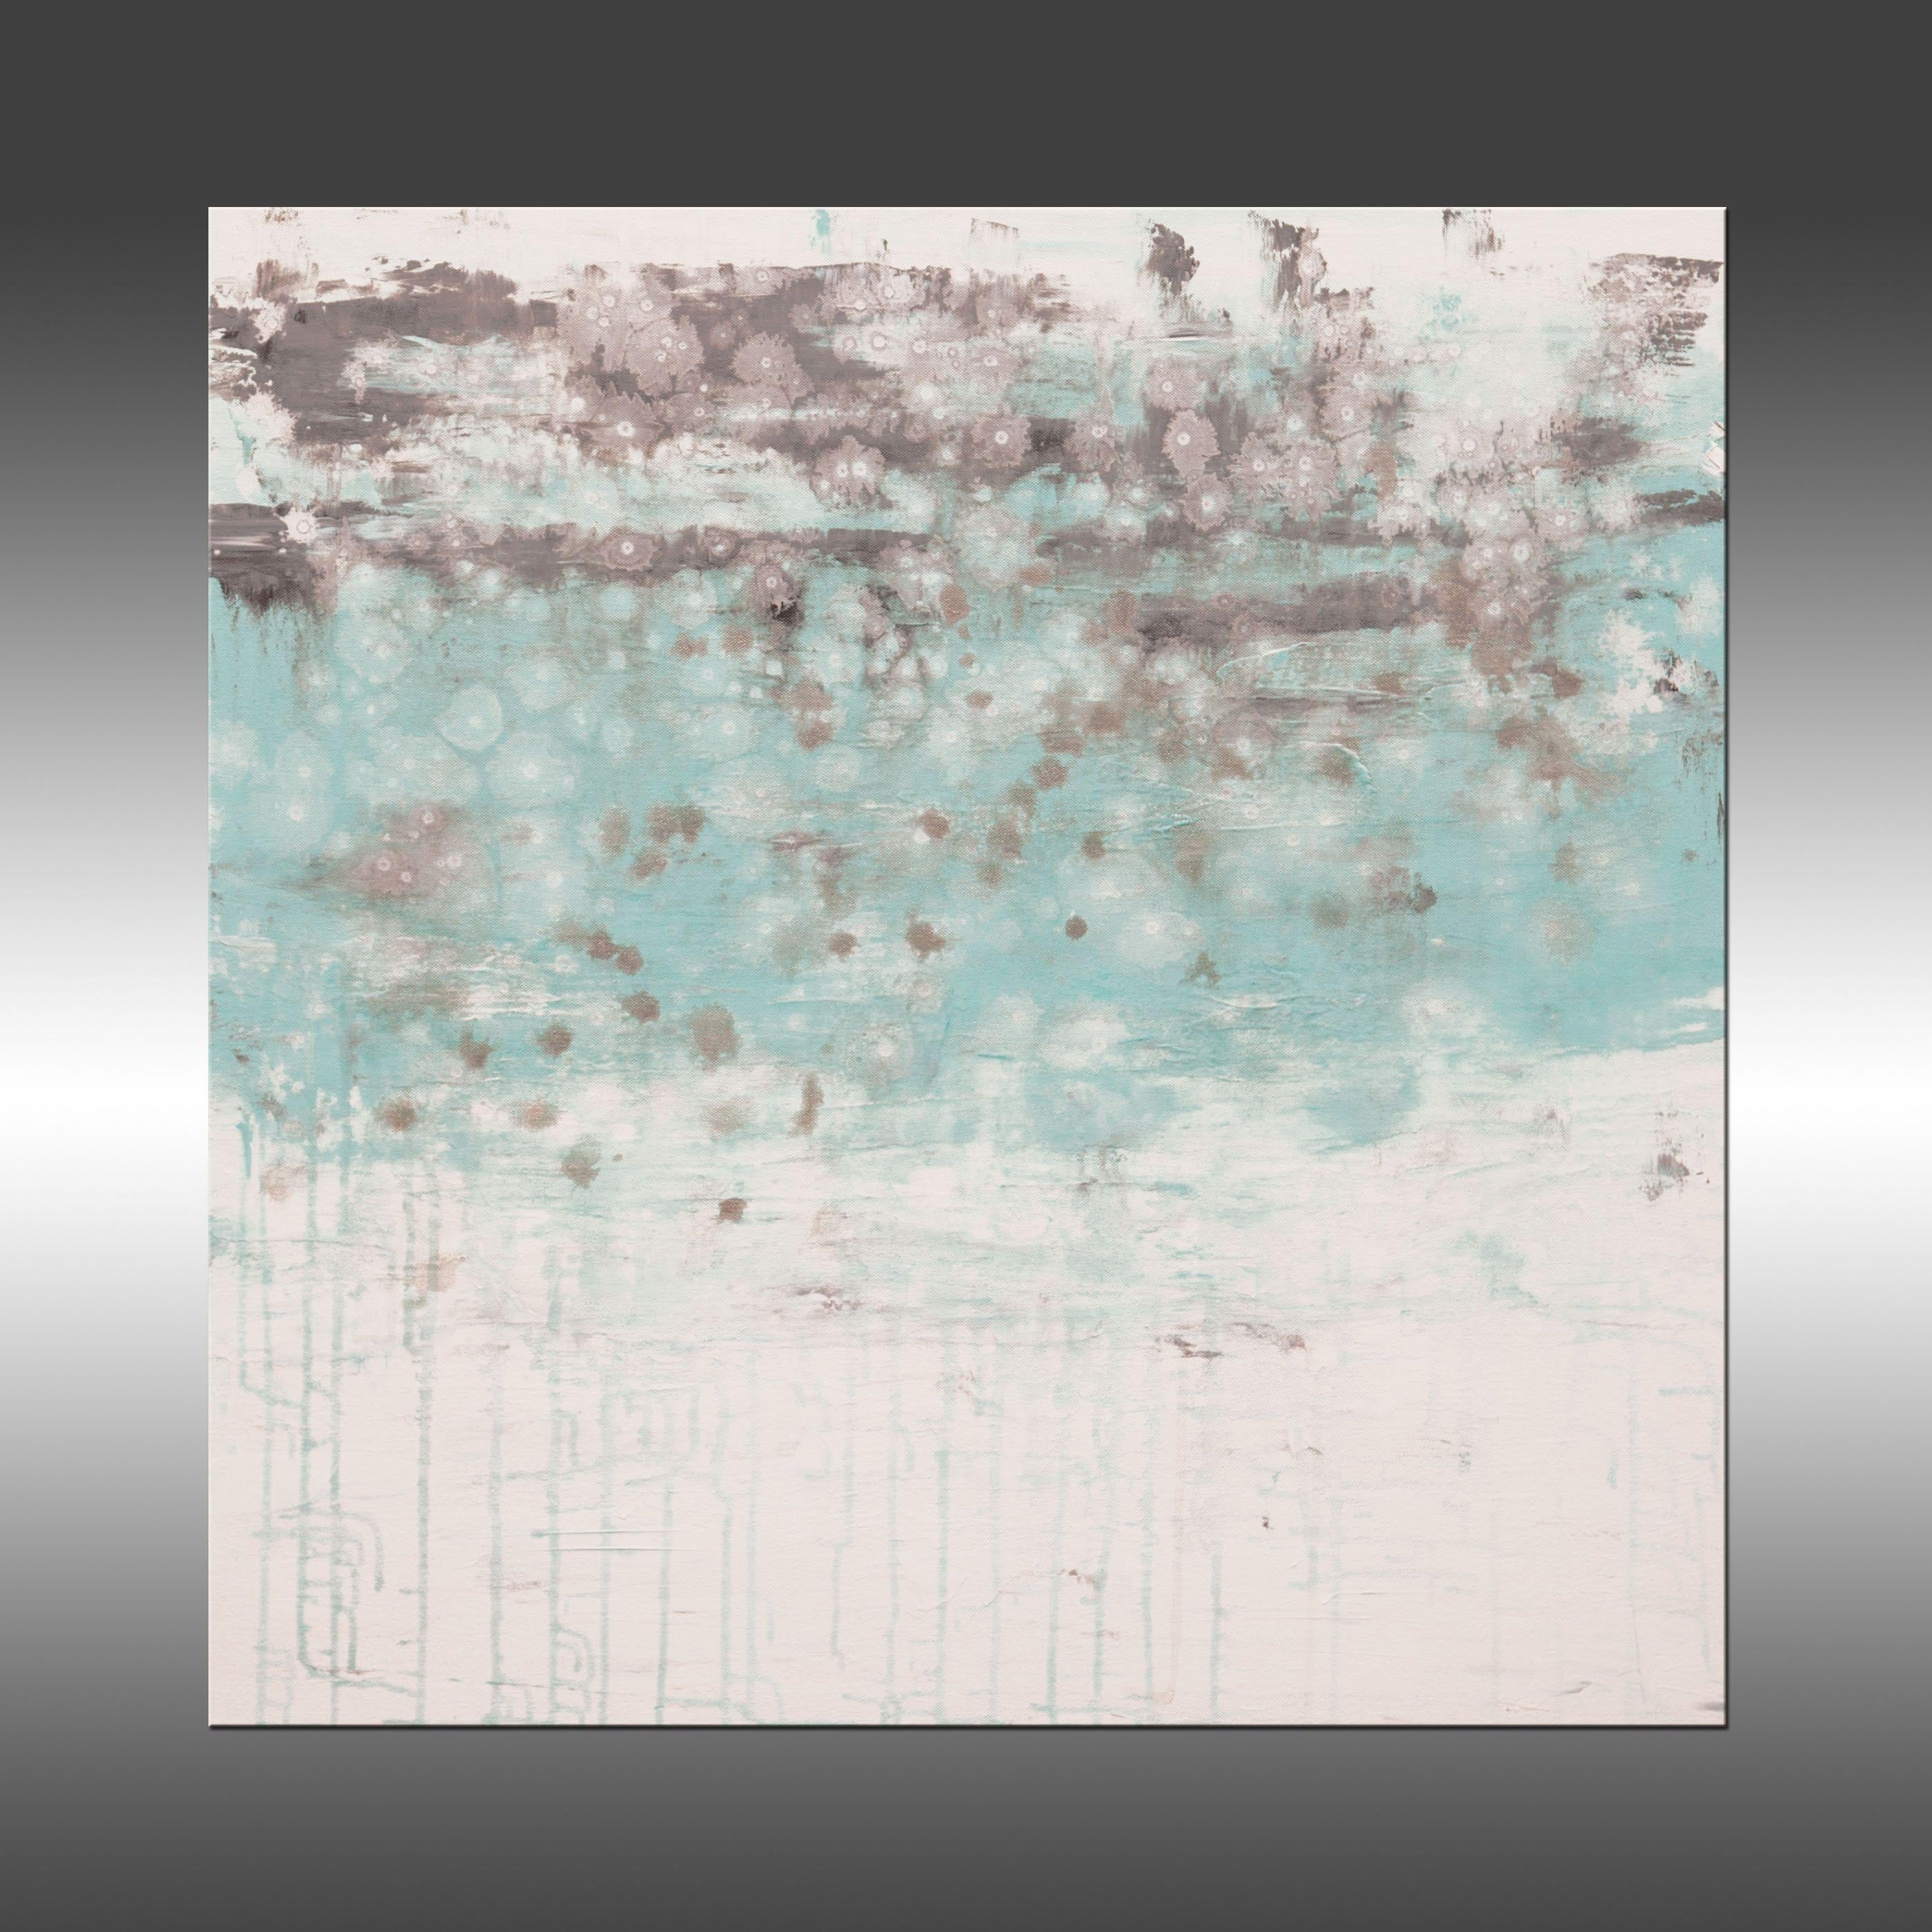 Lithosphere 159 is an original, modern art painting from the Lithosphere series. This one-of-a-kind painting was created with acrylic paint on gallery-wrapped canvas. It has a width of 30 inches and a height of 30 inches with a depth of 1 inch